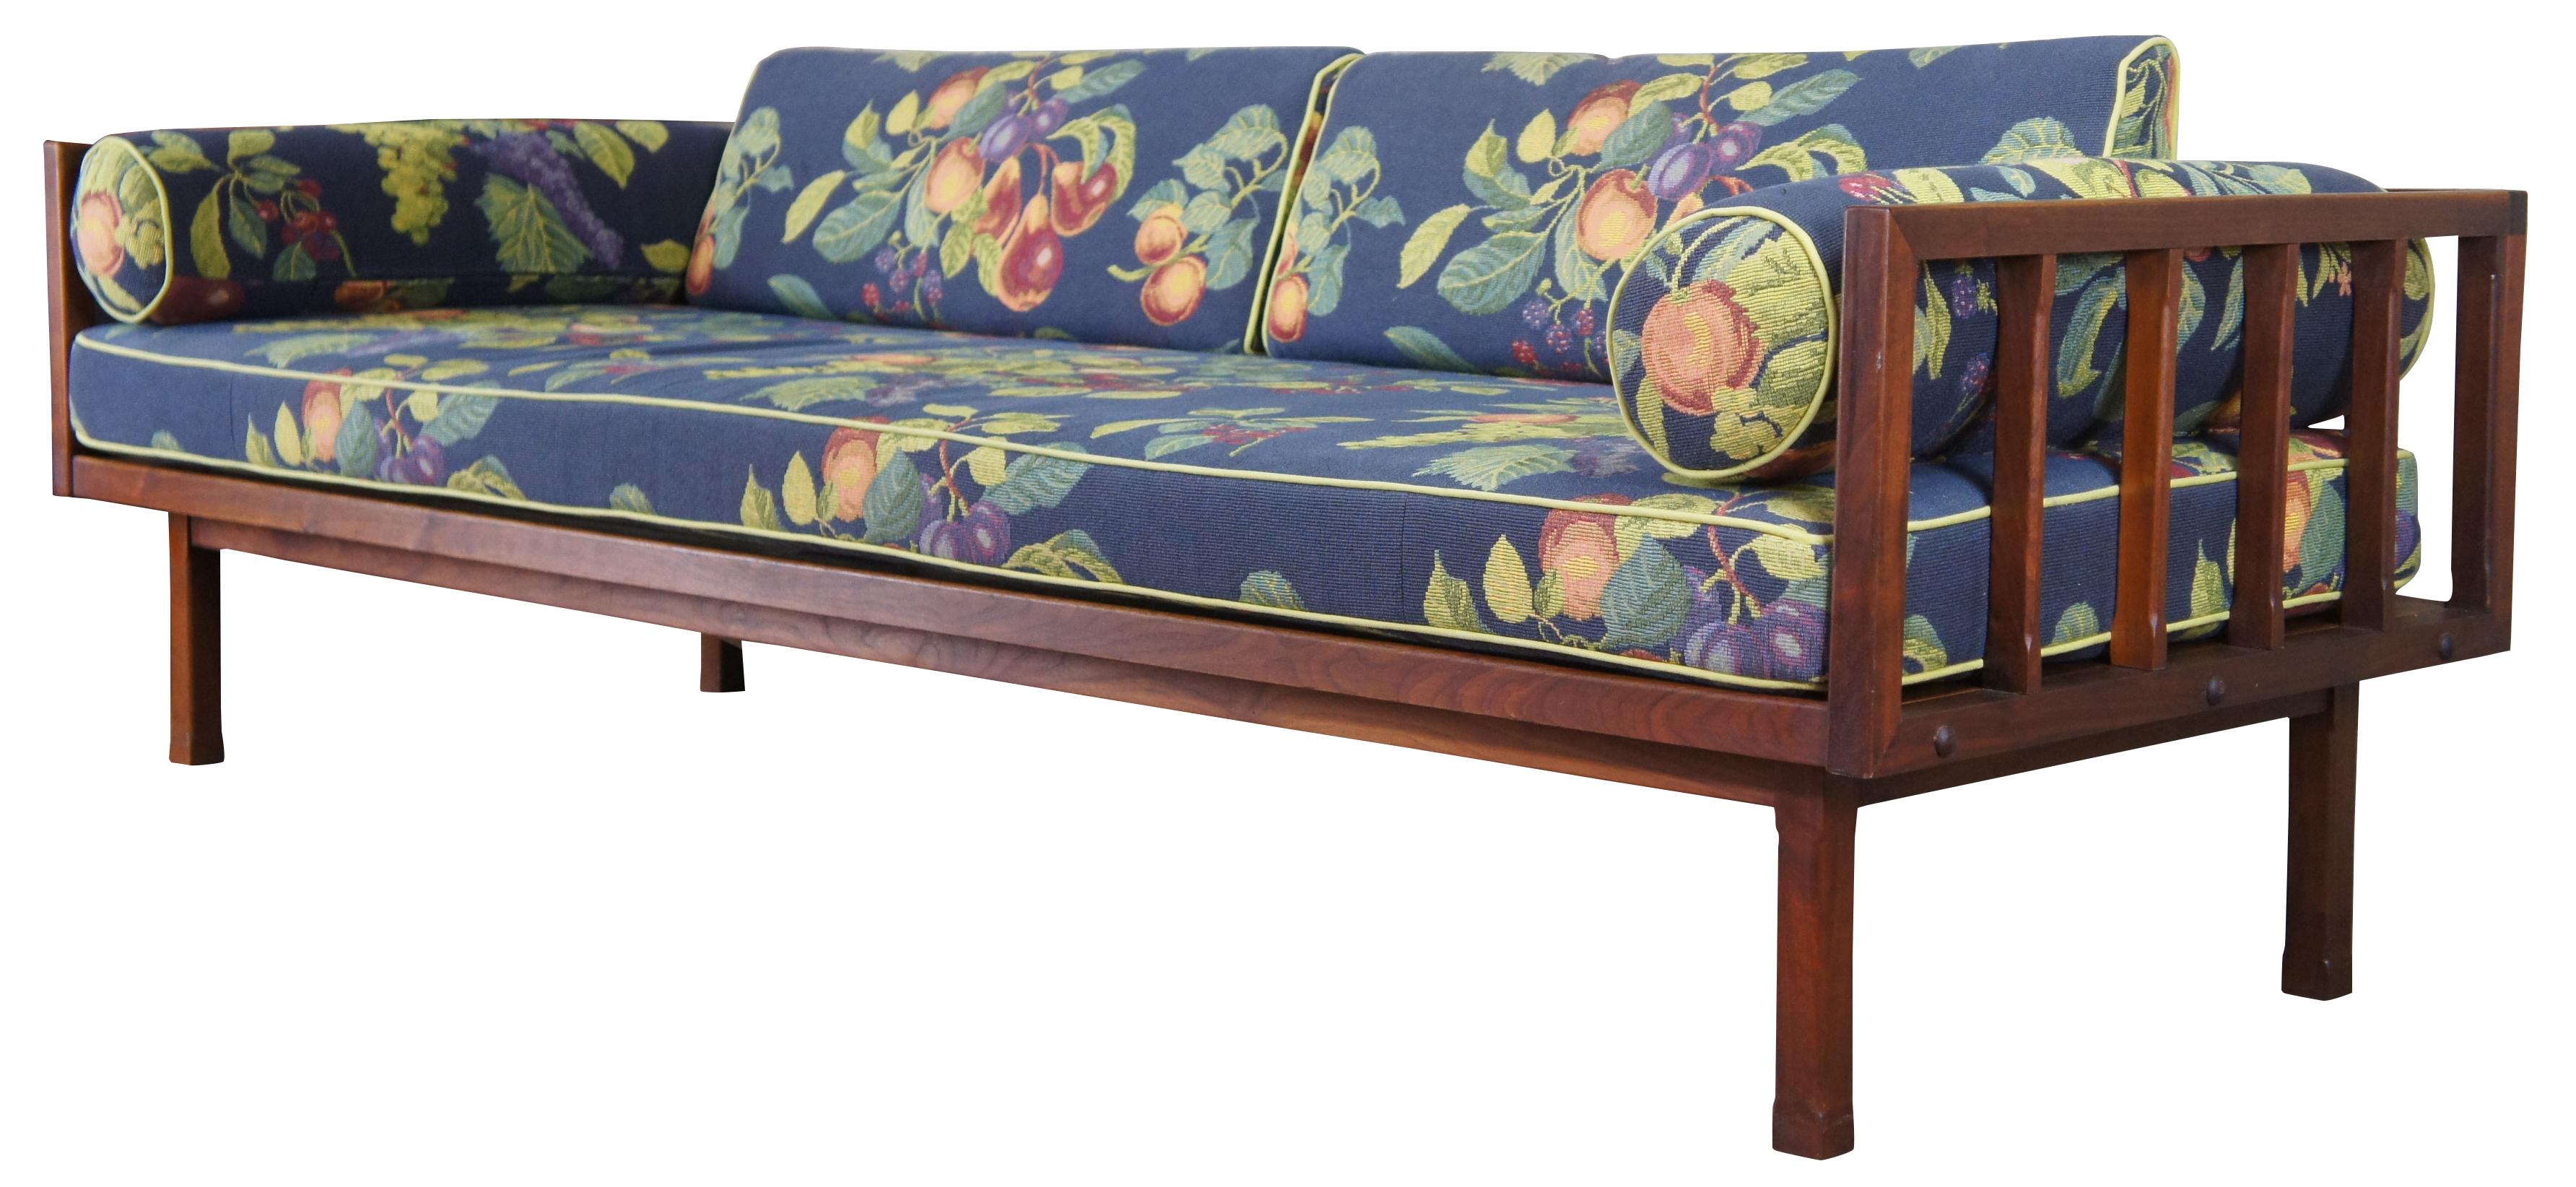 Vintage mid century lounge sofa or couch designed by John Stuart for Rubee Furniture Company of Chicago. Made of Rosewood featuring Danish styling and a blue floral still life of fruit styled upholstery. Measure: 82